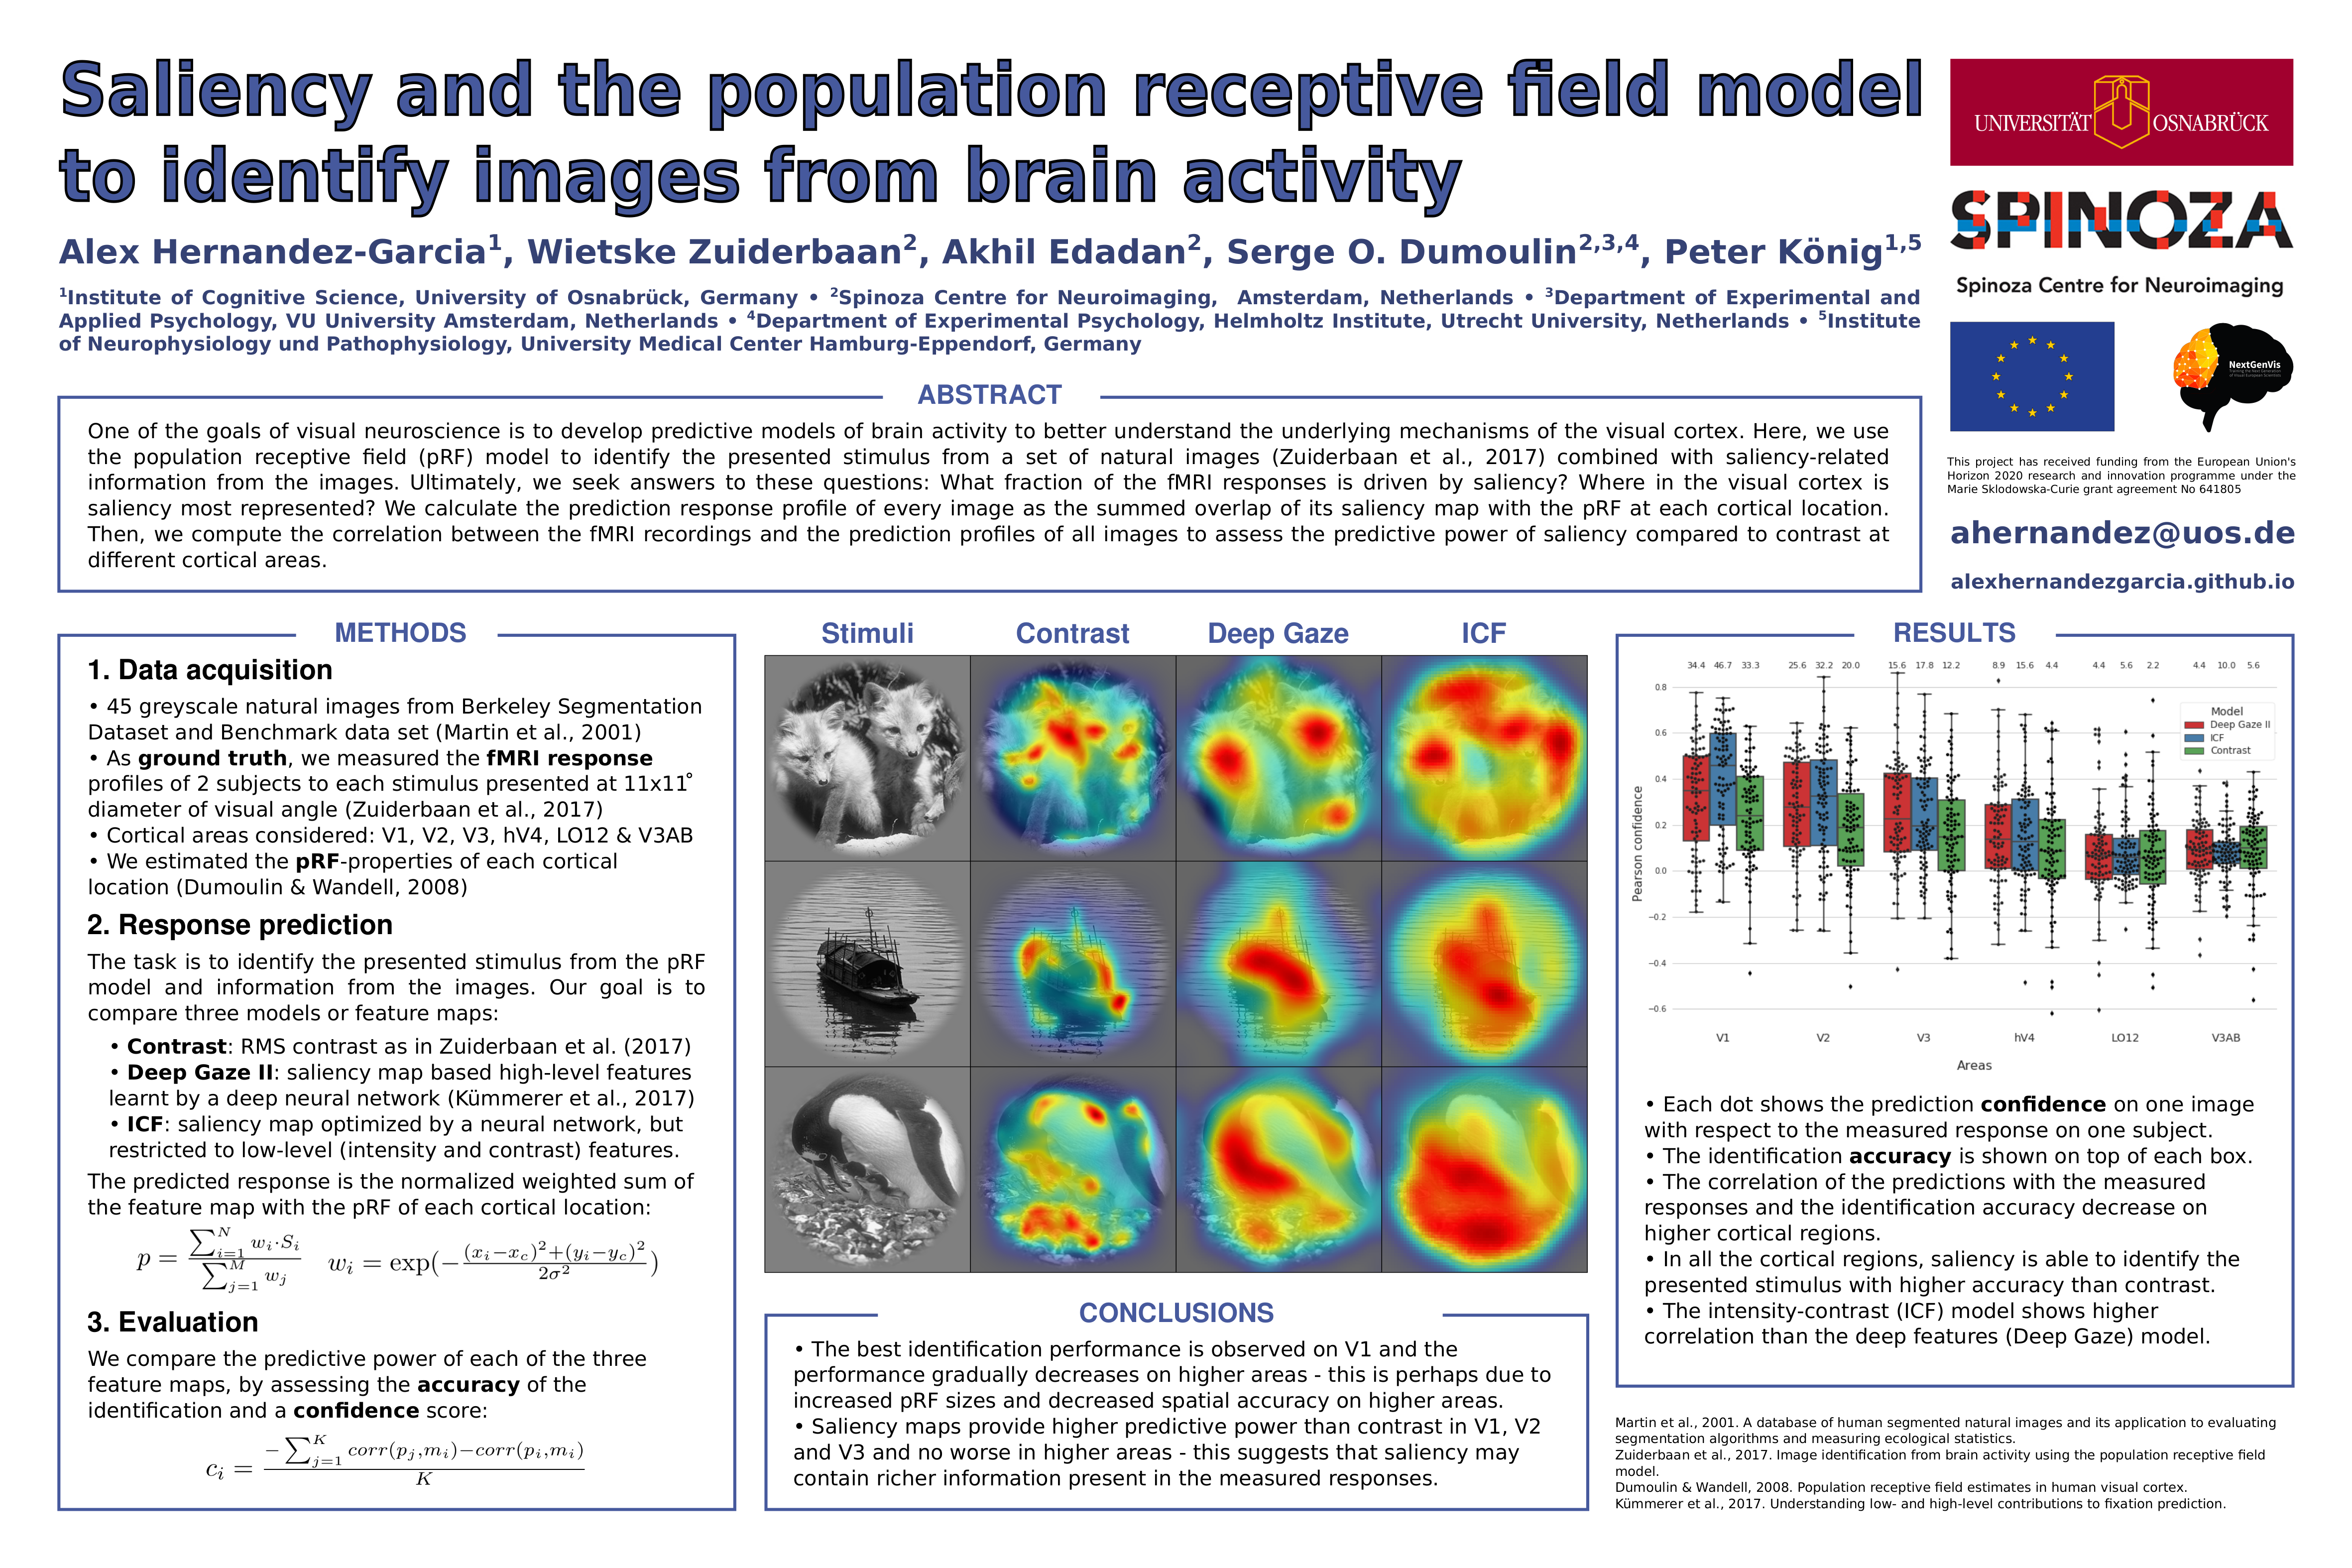 Saliency and the population receptive field model to identify images from brain activity